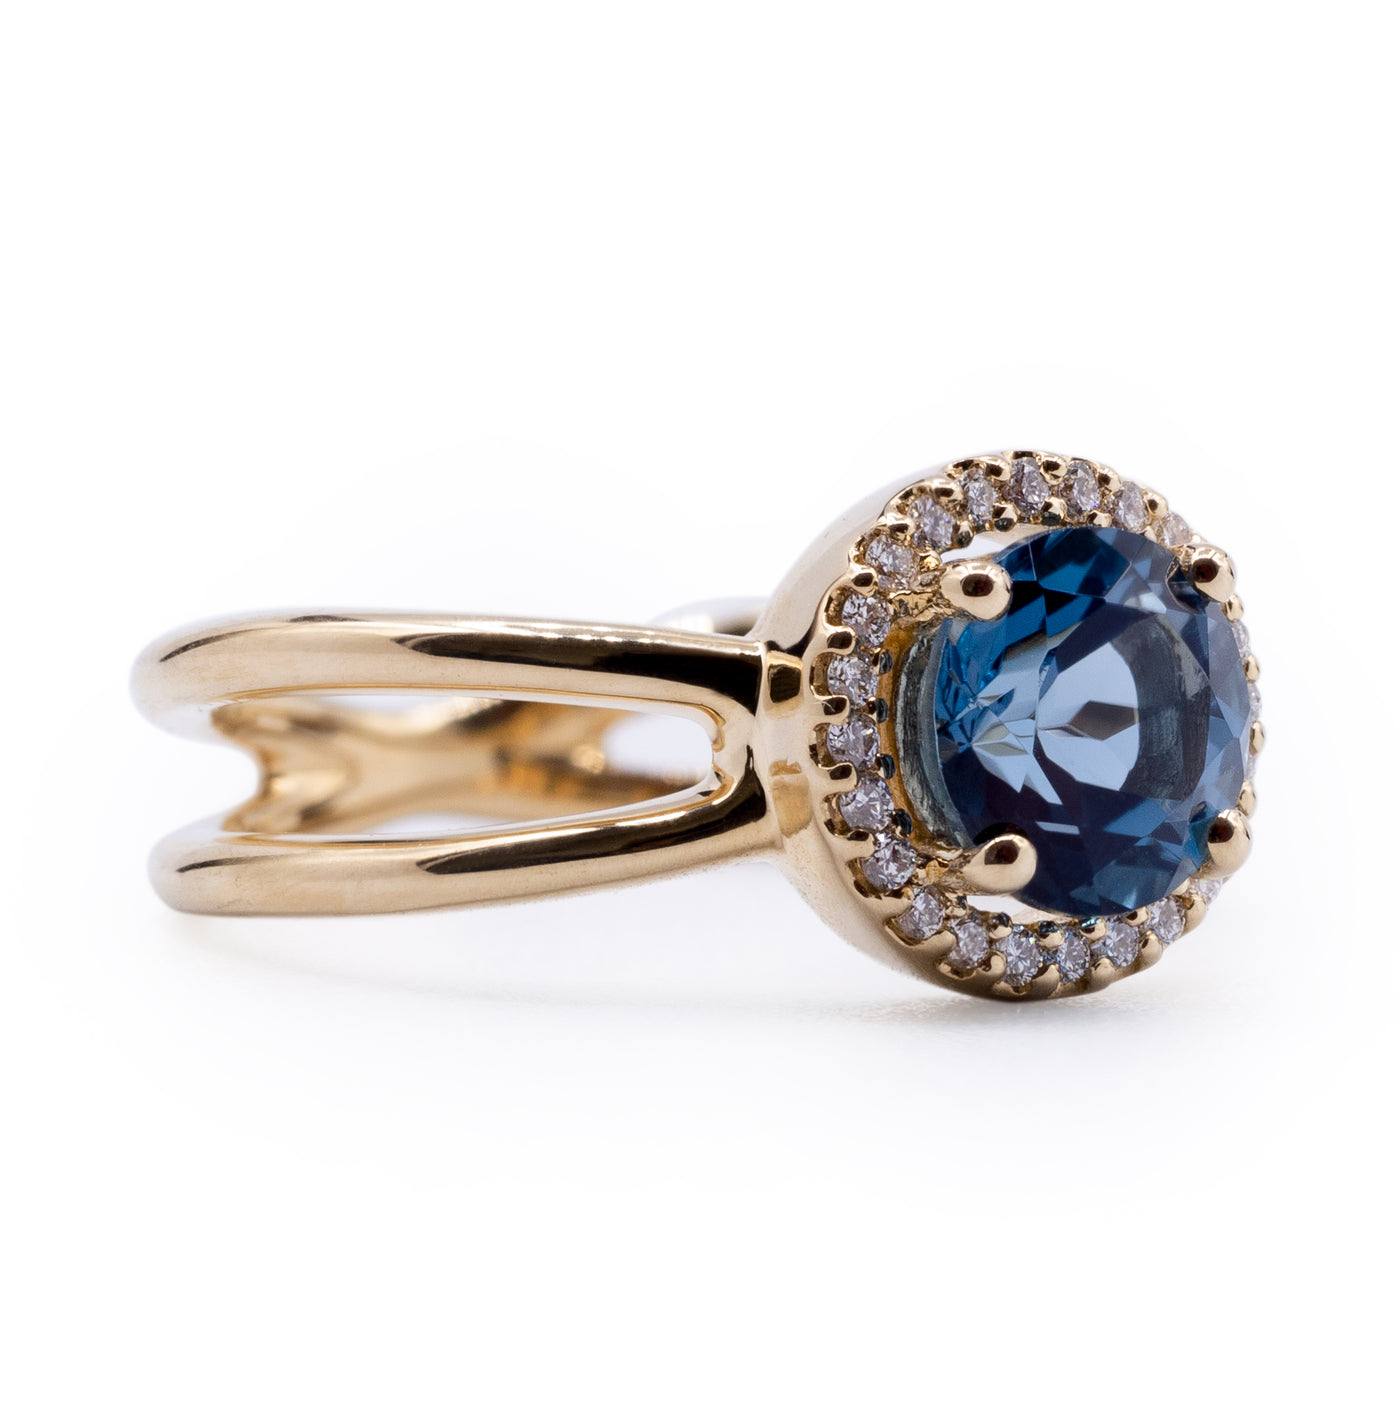 Round London Blue Topaz Setting with Diamond Accented Halo and Criss Cross Shank Ring